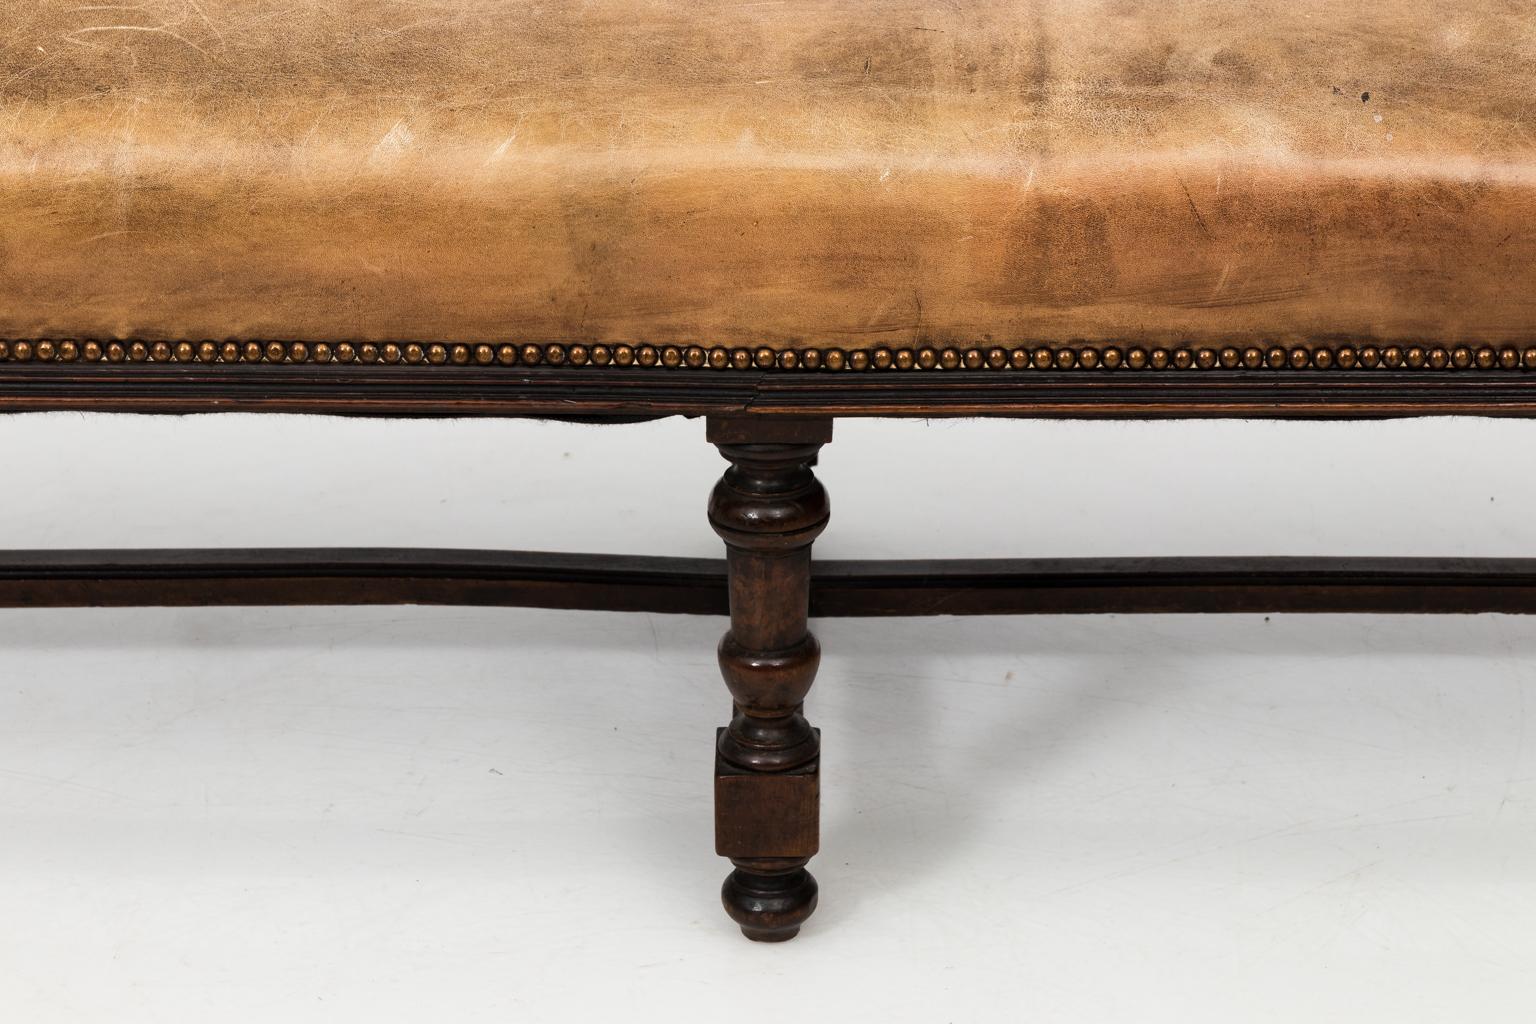 Walnut six-legged bench with cross stretcher and leather covering, circa 1900s.
 